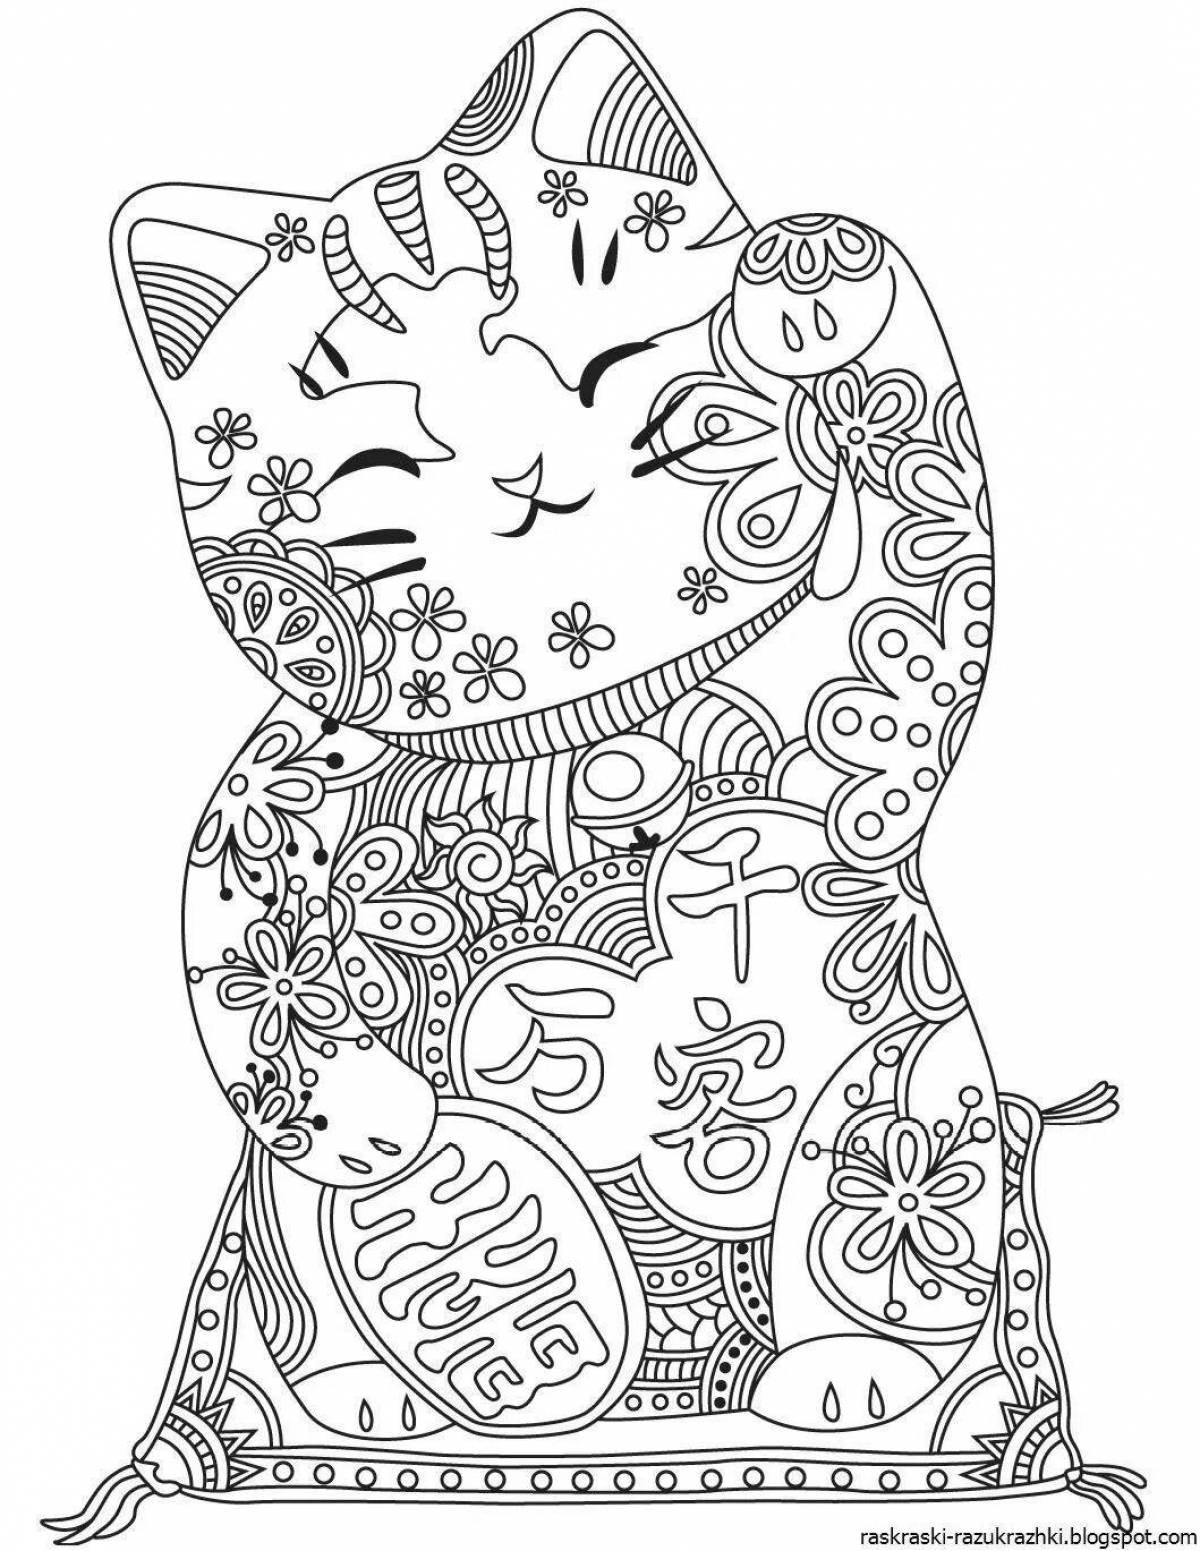 Coloring fluffy patterned cat